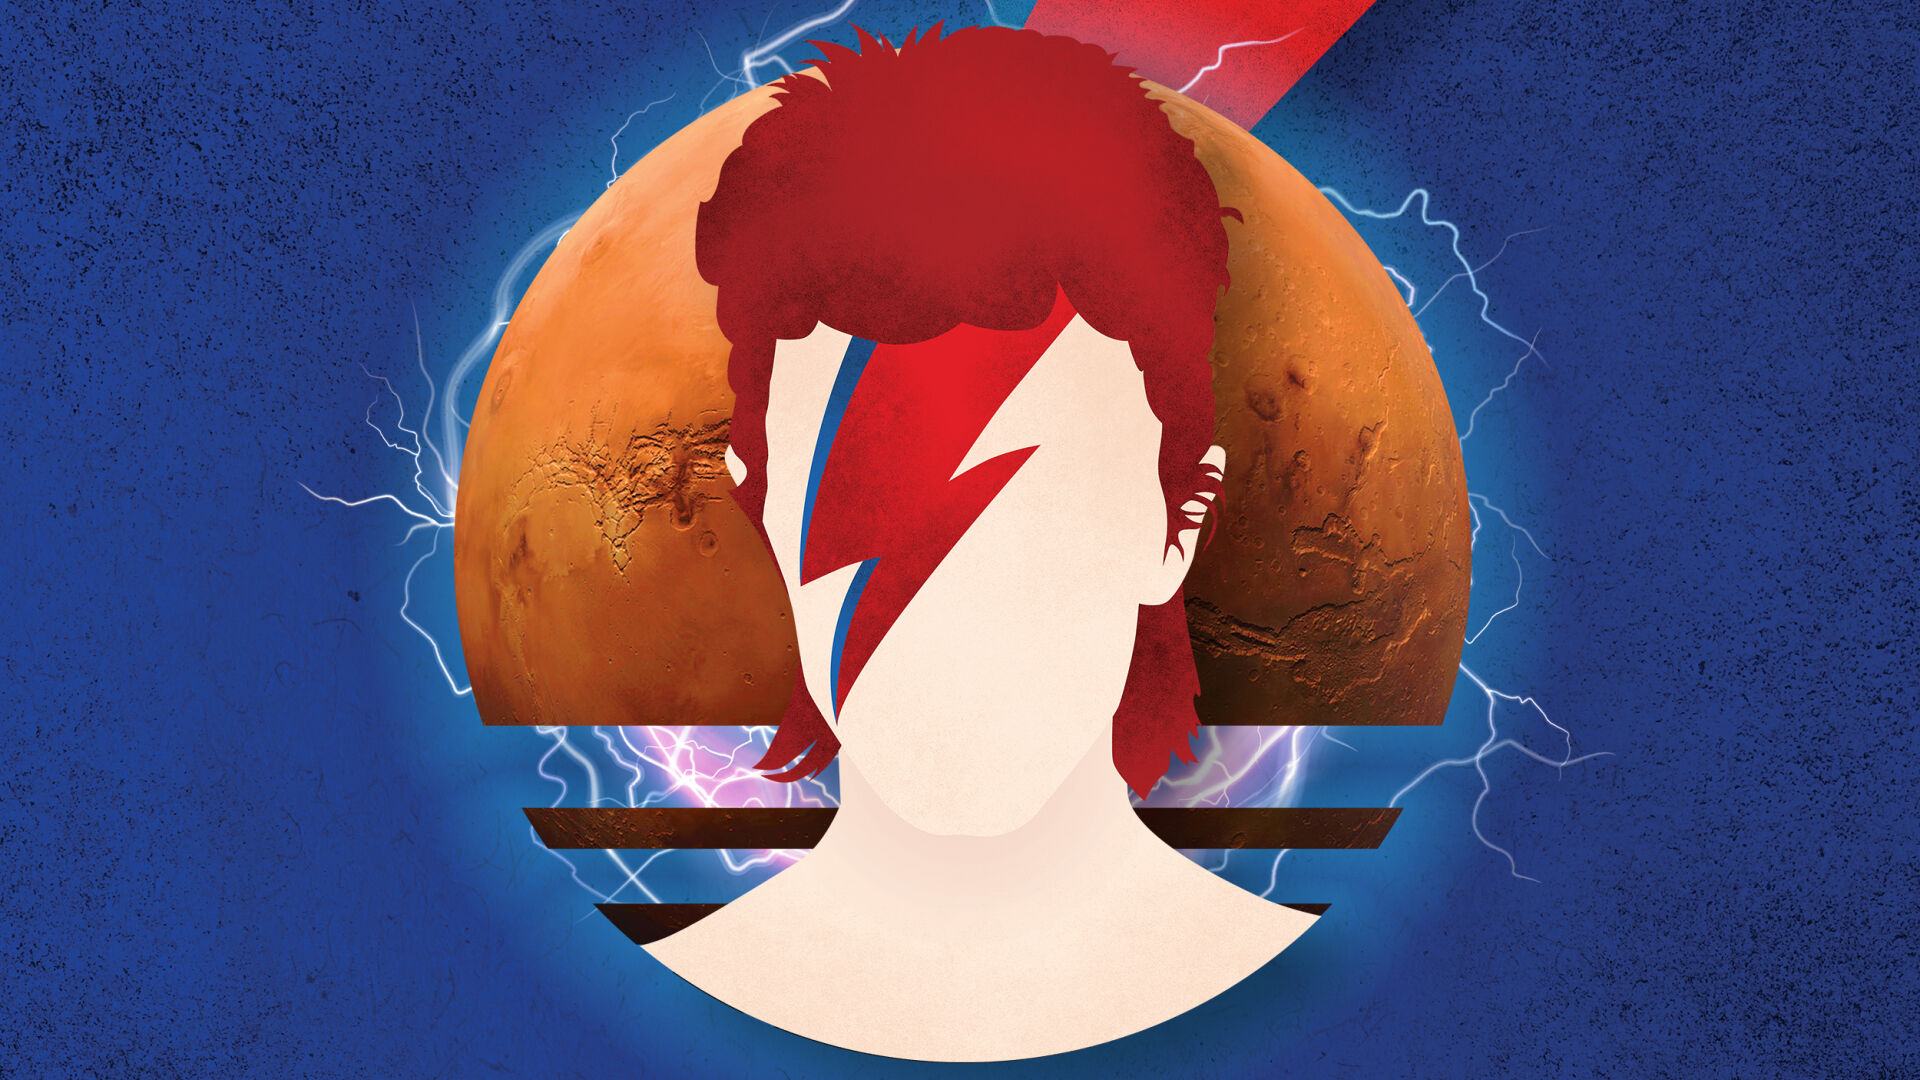 An abstract image featuring the iconic David Bowie and a red flash.